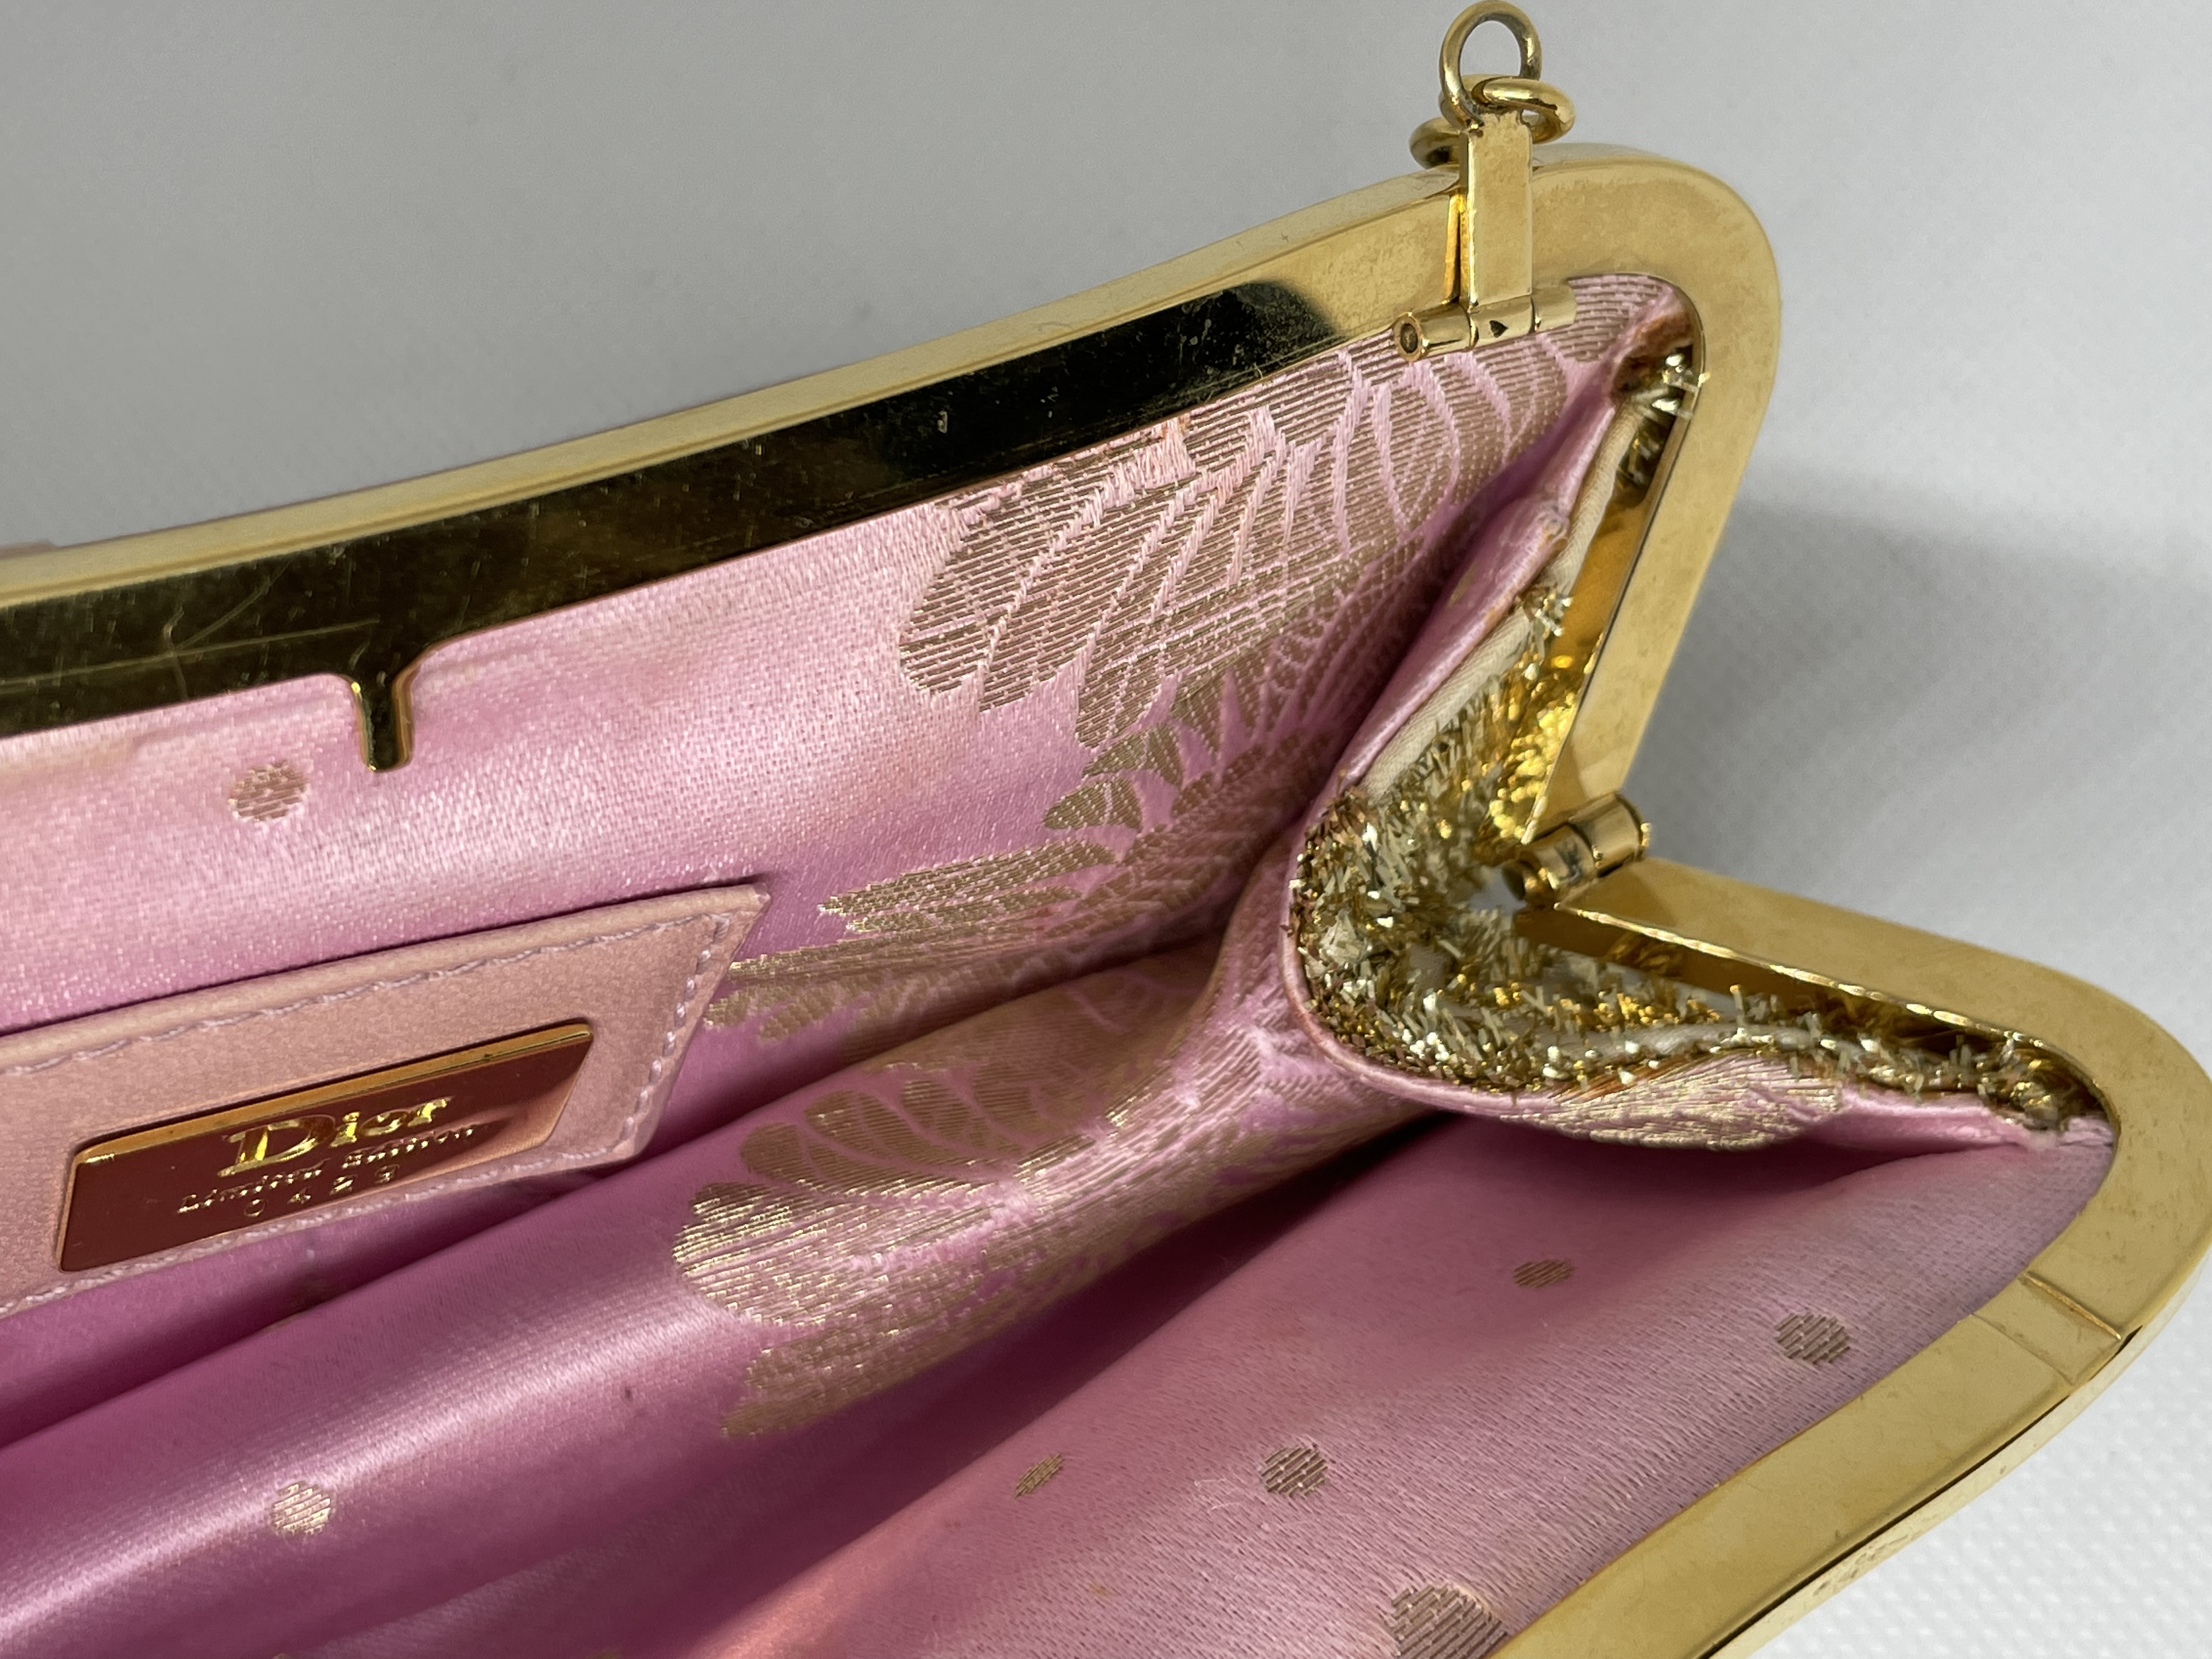 Dior Saddle MiniClutch Limited edition in gold coloured embroidery over cream satin - Image 5 of 14